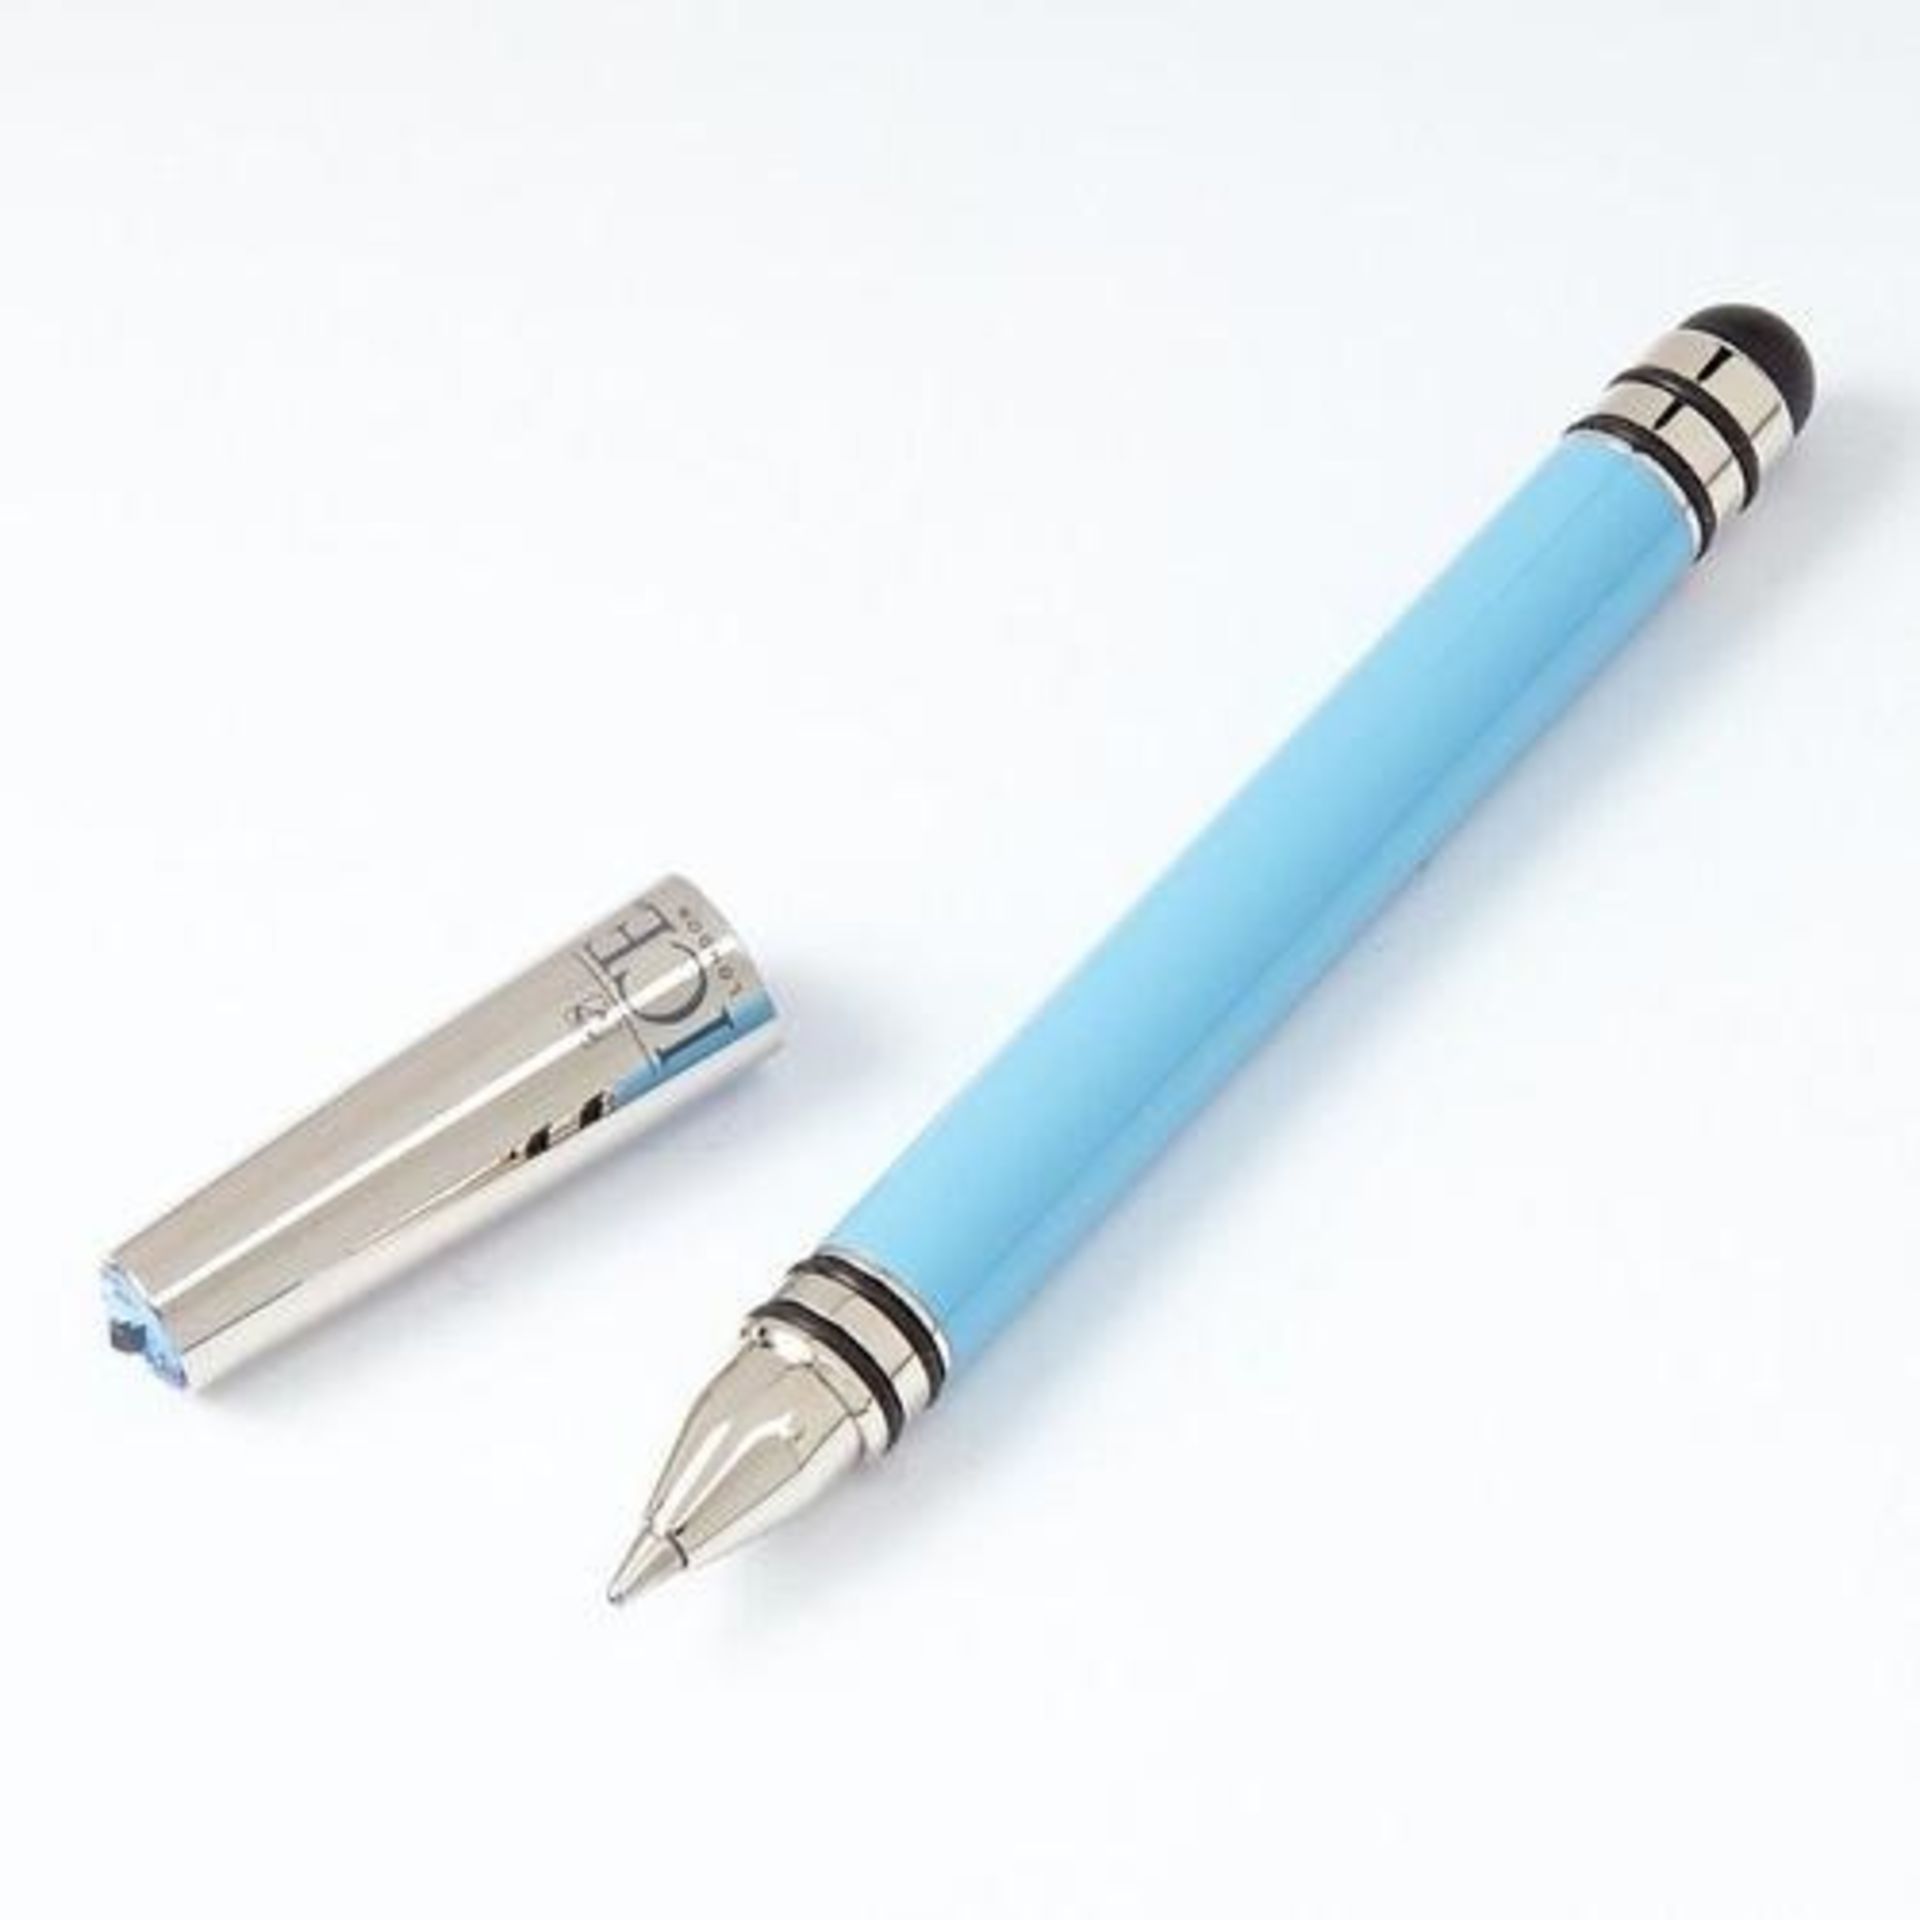 50 x ICE LONDON App Pen Duo - Touch Stylus And Ink Pen Combined - Colour: LIGHT BLUE - MADE WITH - Image 5 of 5